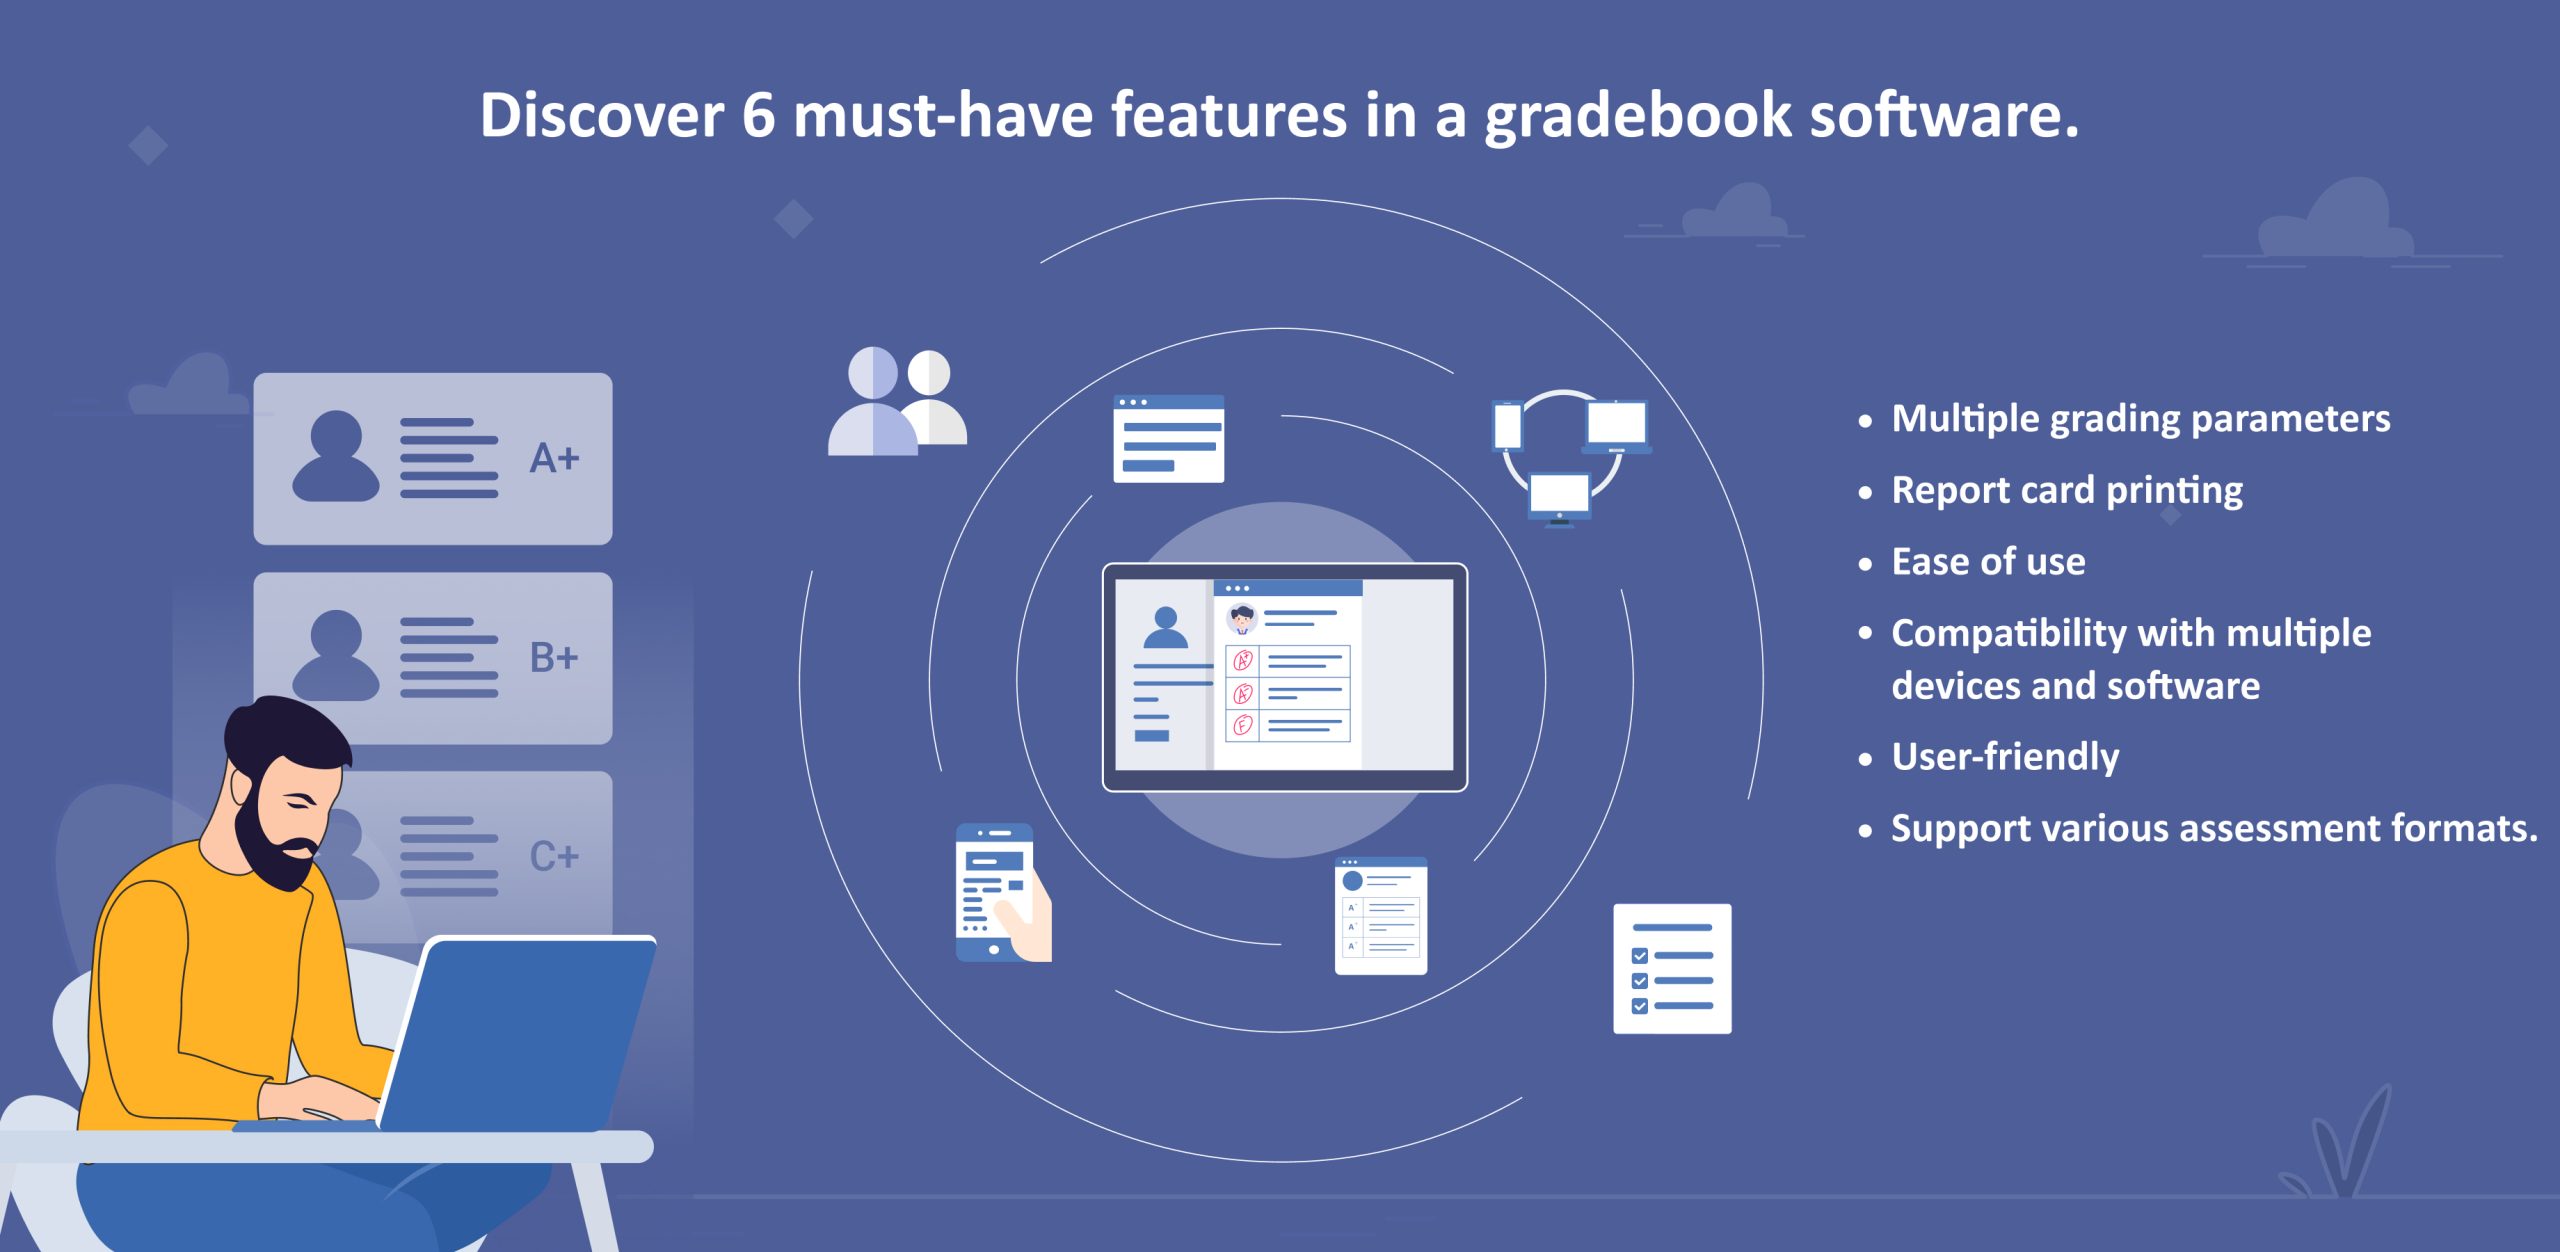 What are the key features of an online gradebook software?